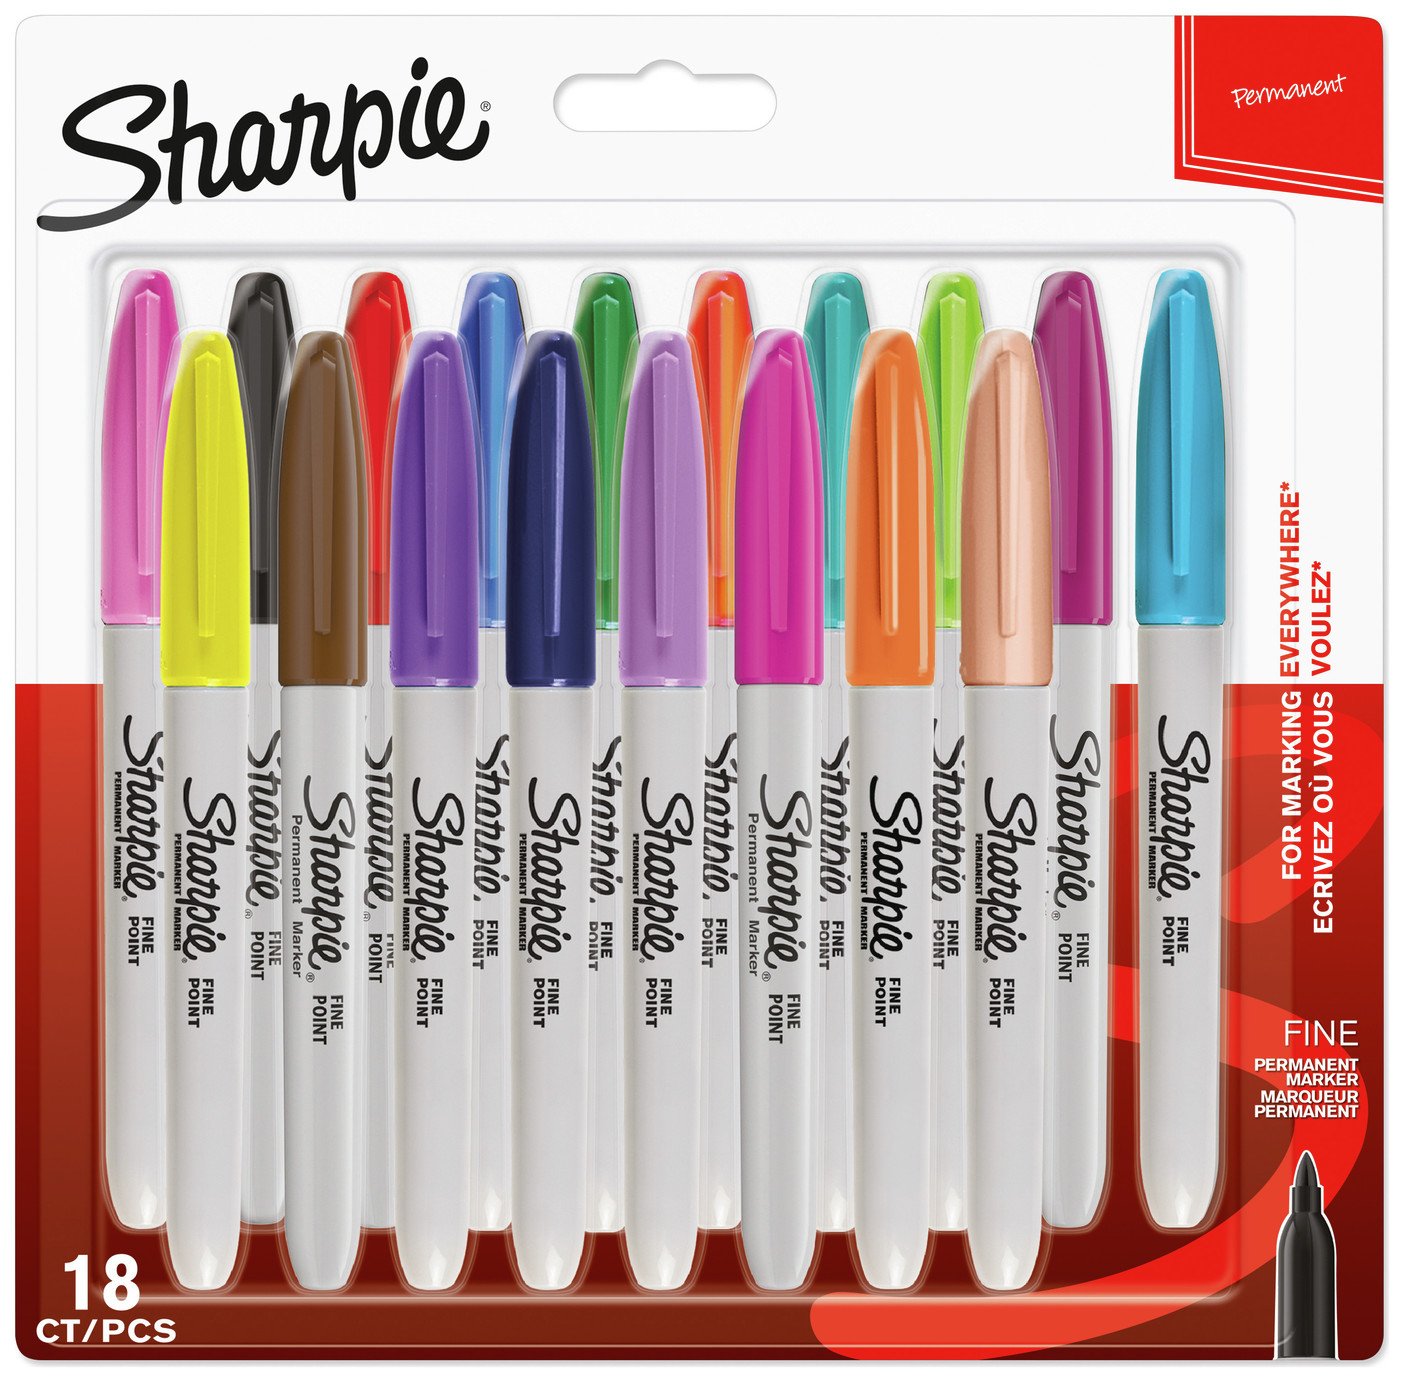 Sharpie Fine Tip Permanent Markers - 18 Pack